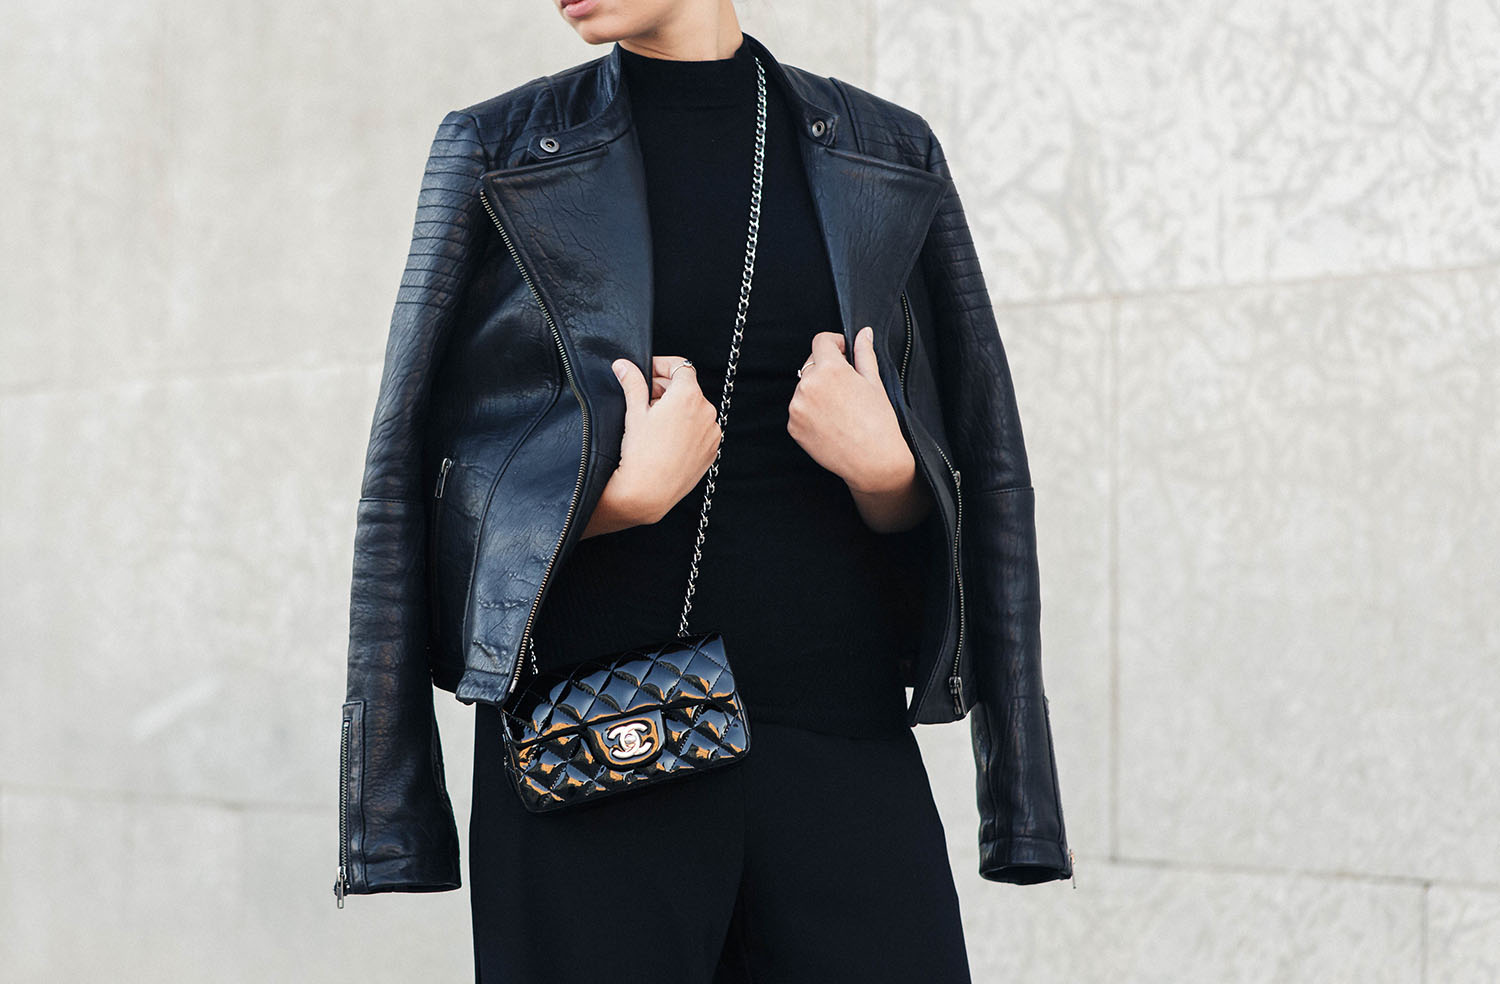 Outfit details on Canadian fashion blogger Cee Fardoe of Coco & Vera, captured by Christa Wong Photography, including a Cupcakes and Cashmere leather jacket and Chanel black patent handbag